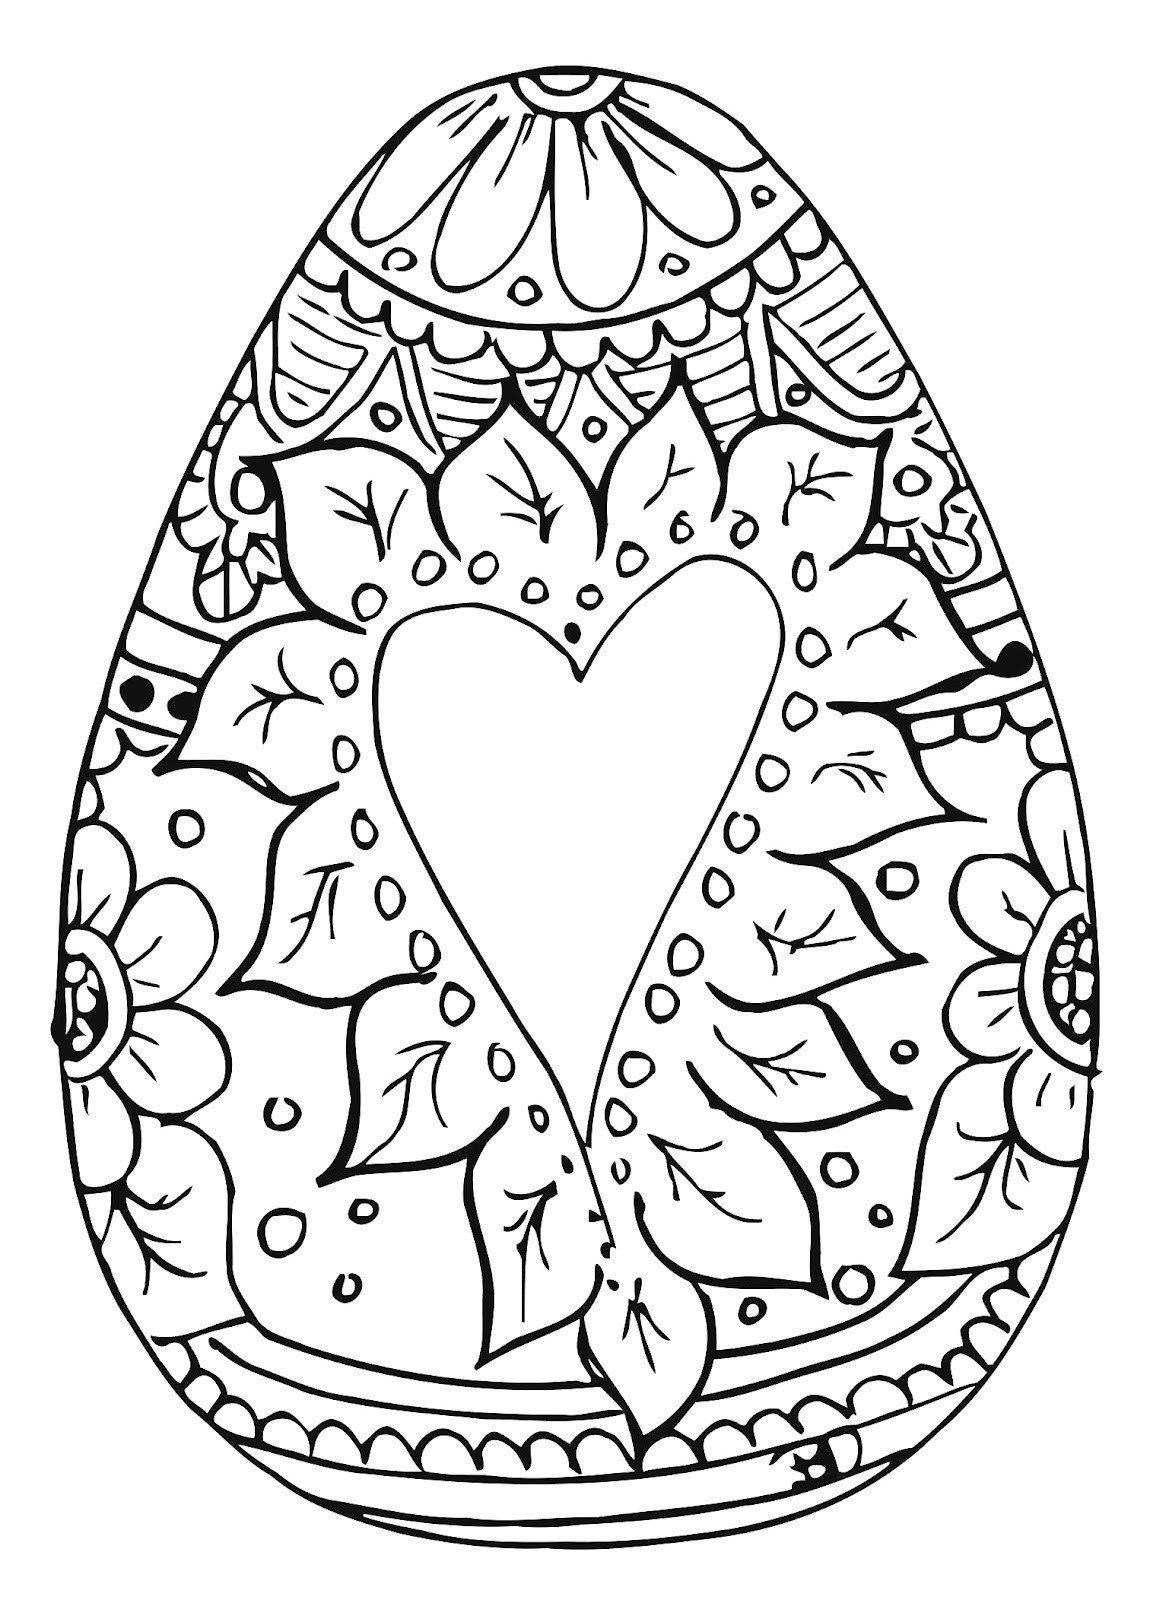 Resurrection Coloring Pages
 Easter Coloring Pages for Adults Best Coloring Pages For